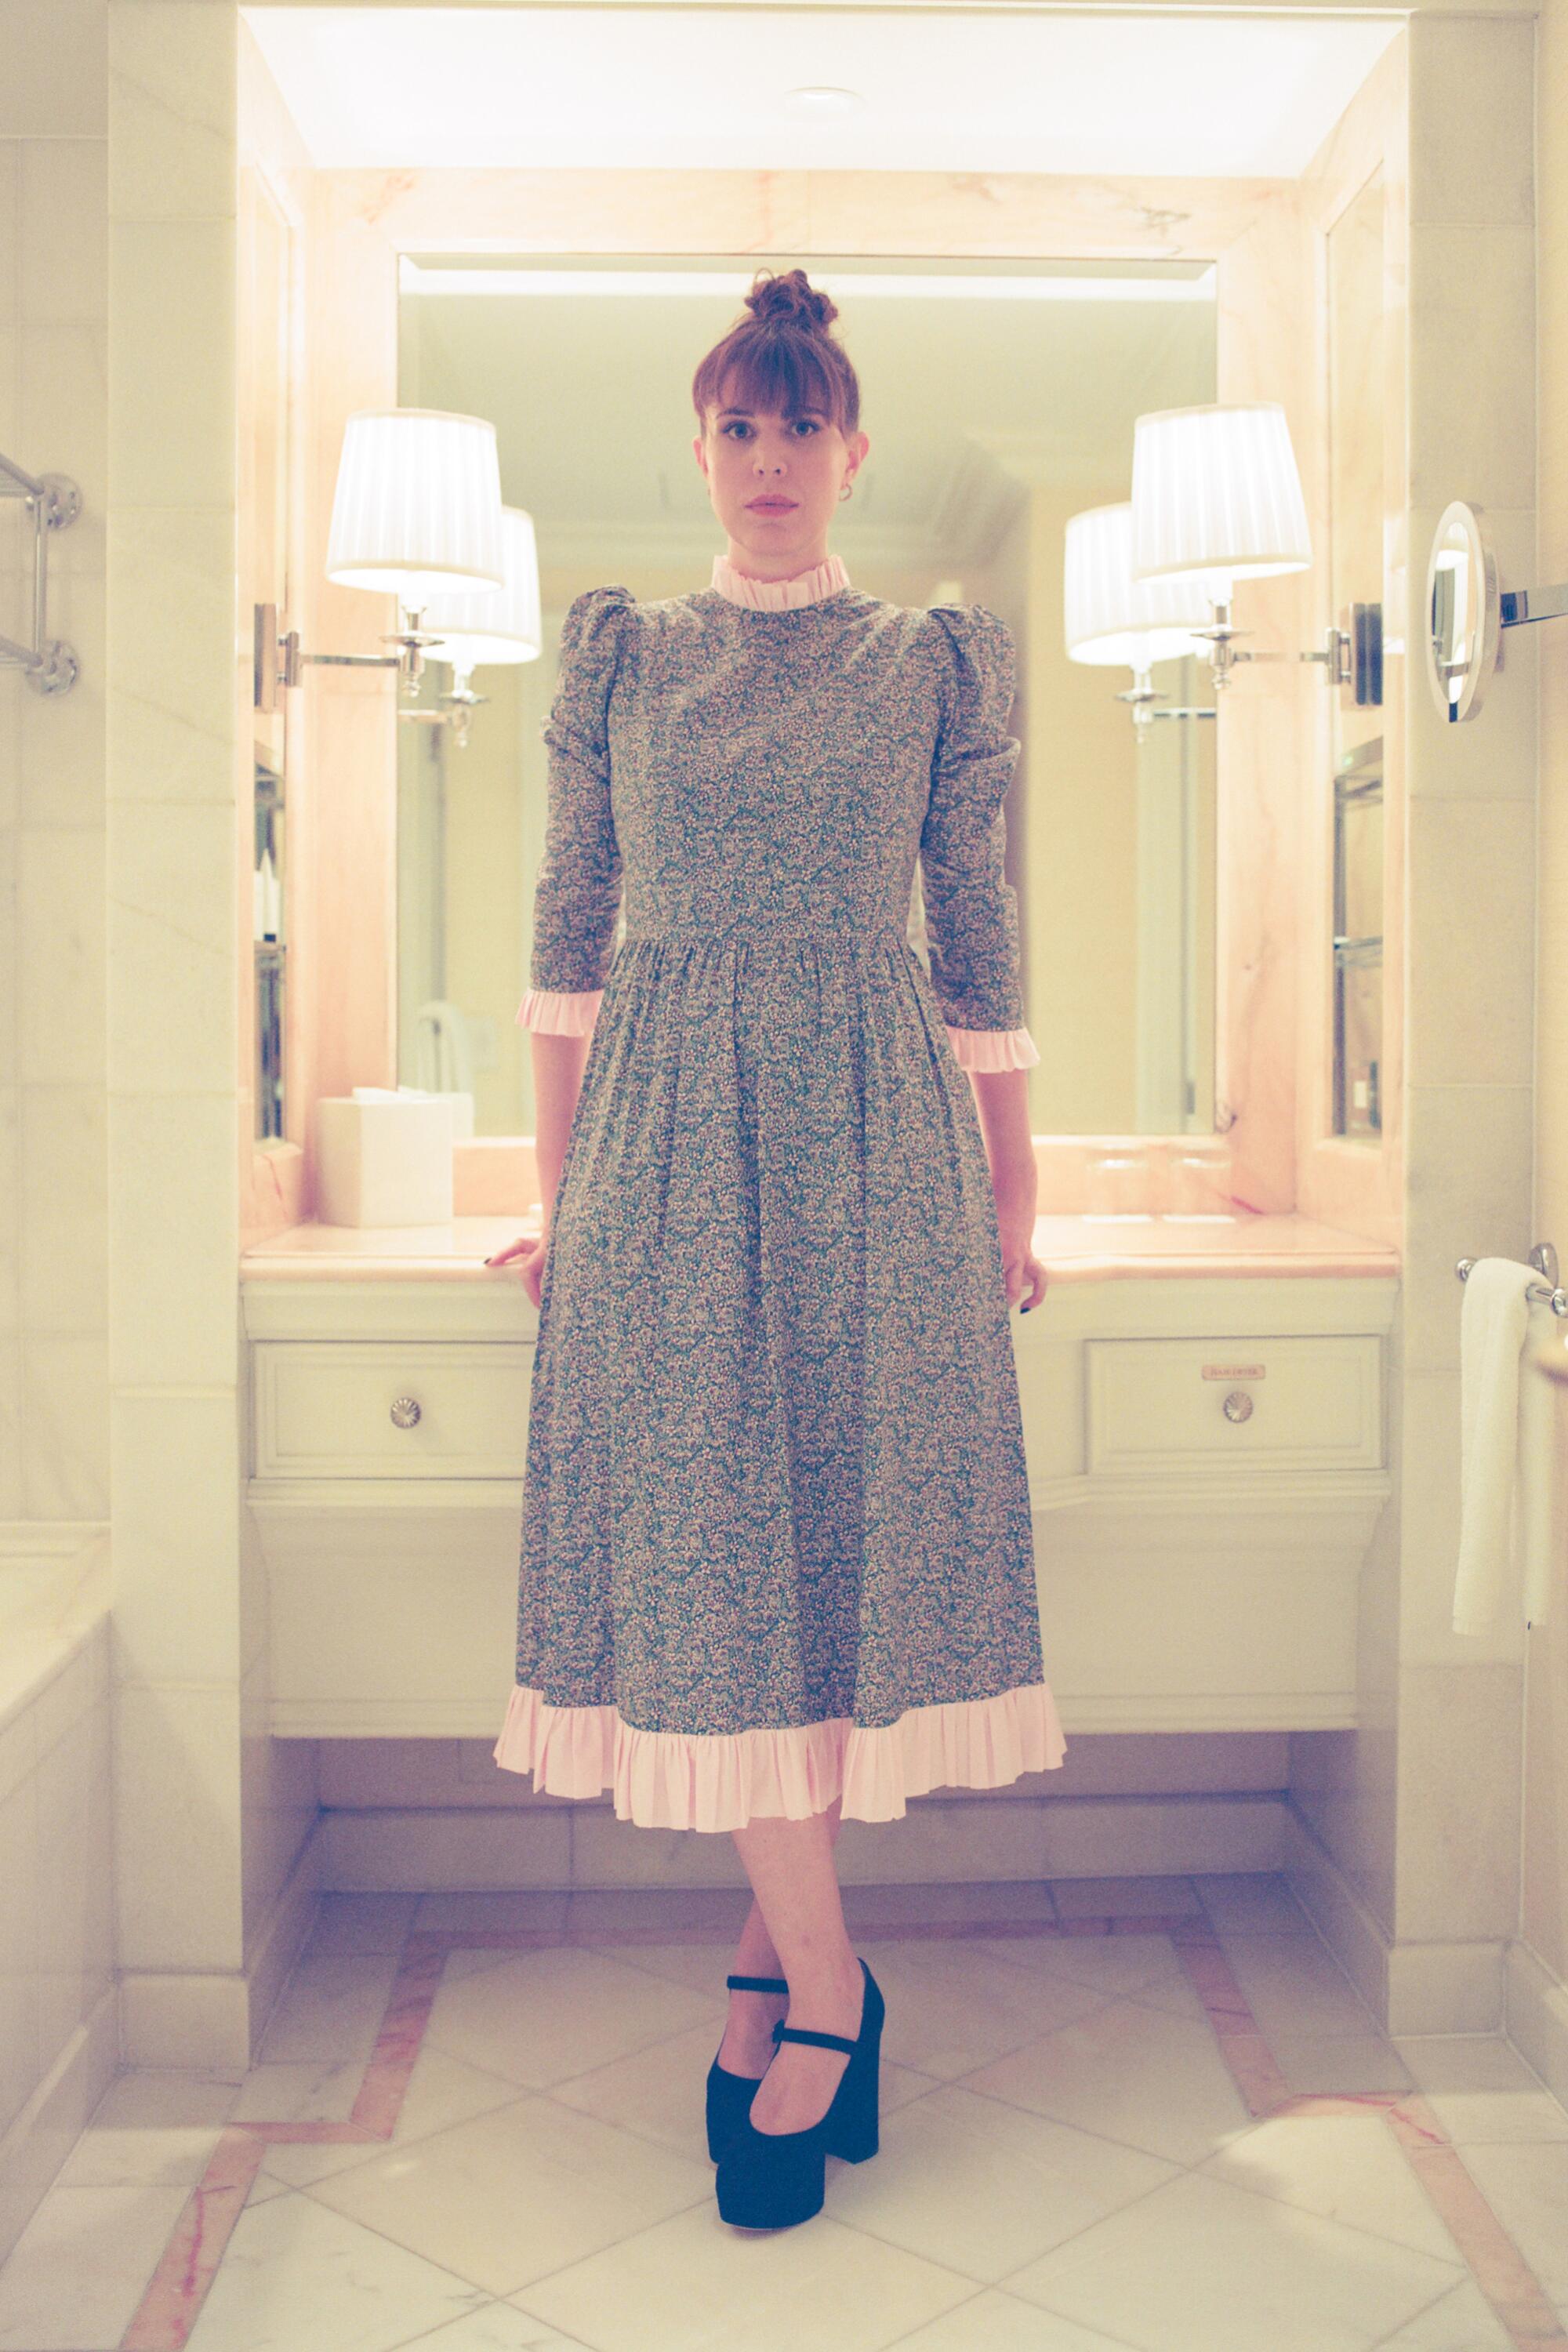 Alice Birch in a modest gray dress and a bun on top of her head stands in a brightly lit hotel bathroom. 